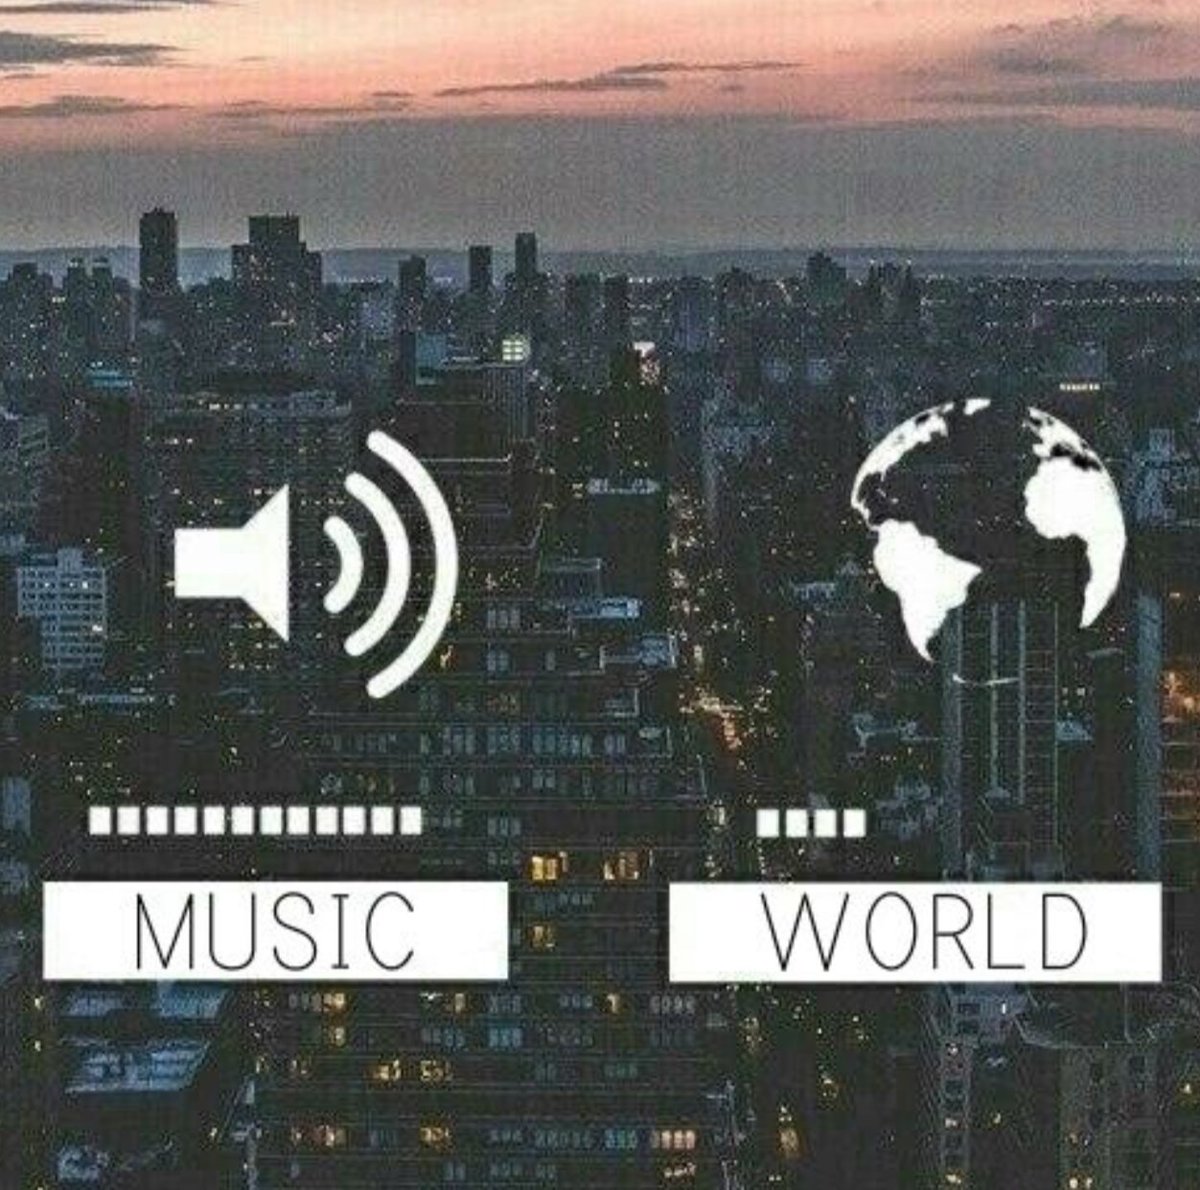 Music up, world down.  Just for a moment ???? https://t.co/NI1mYM9HmC